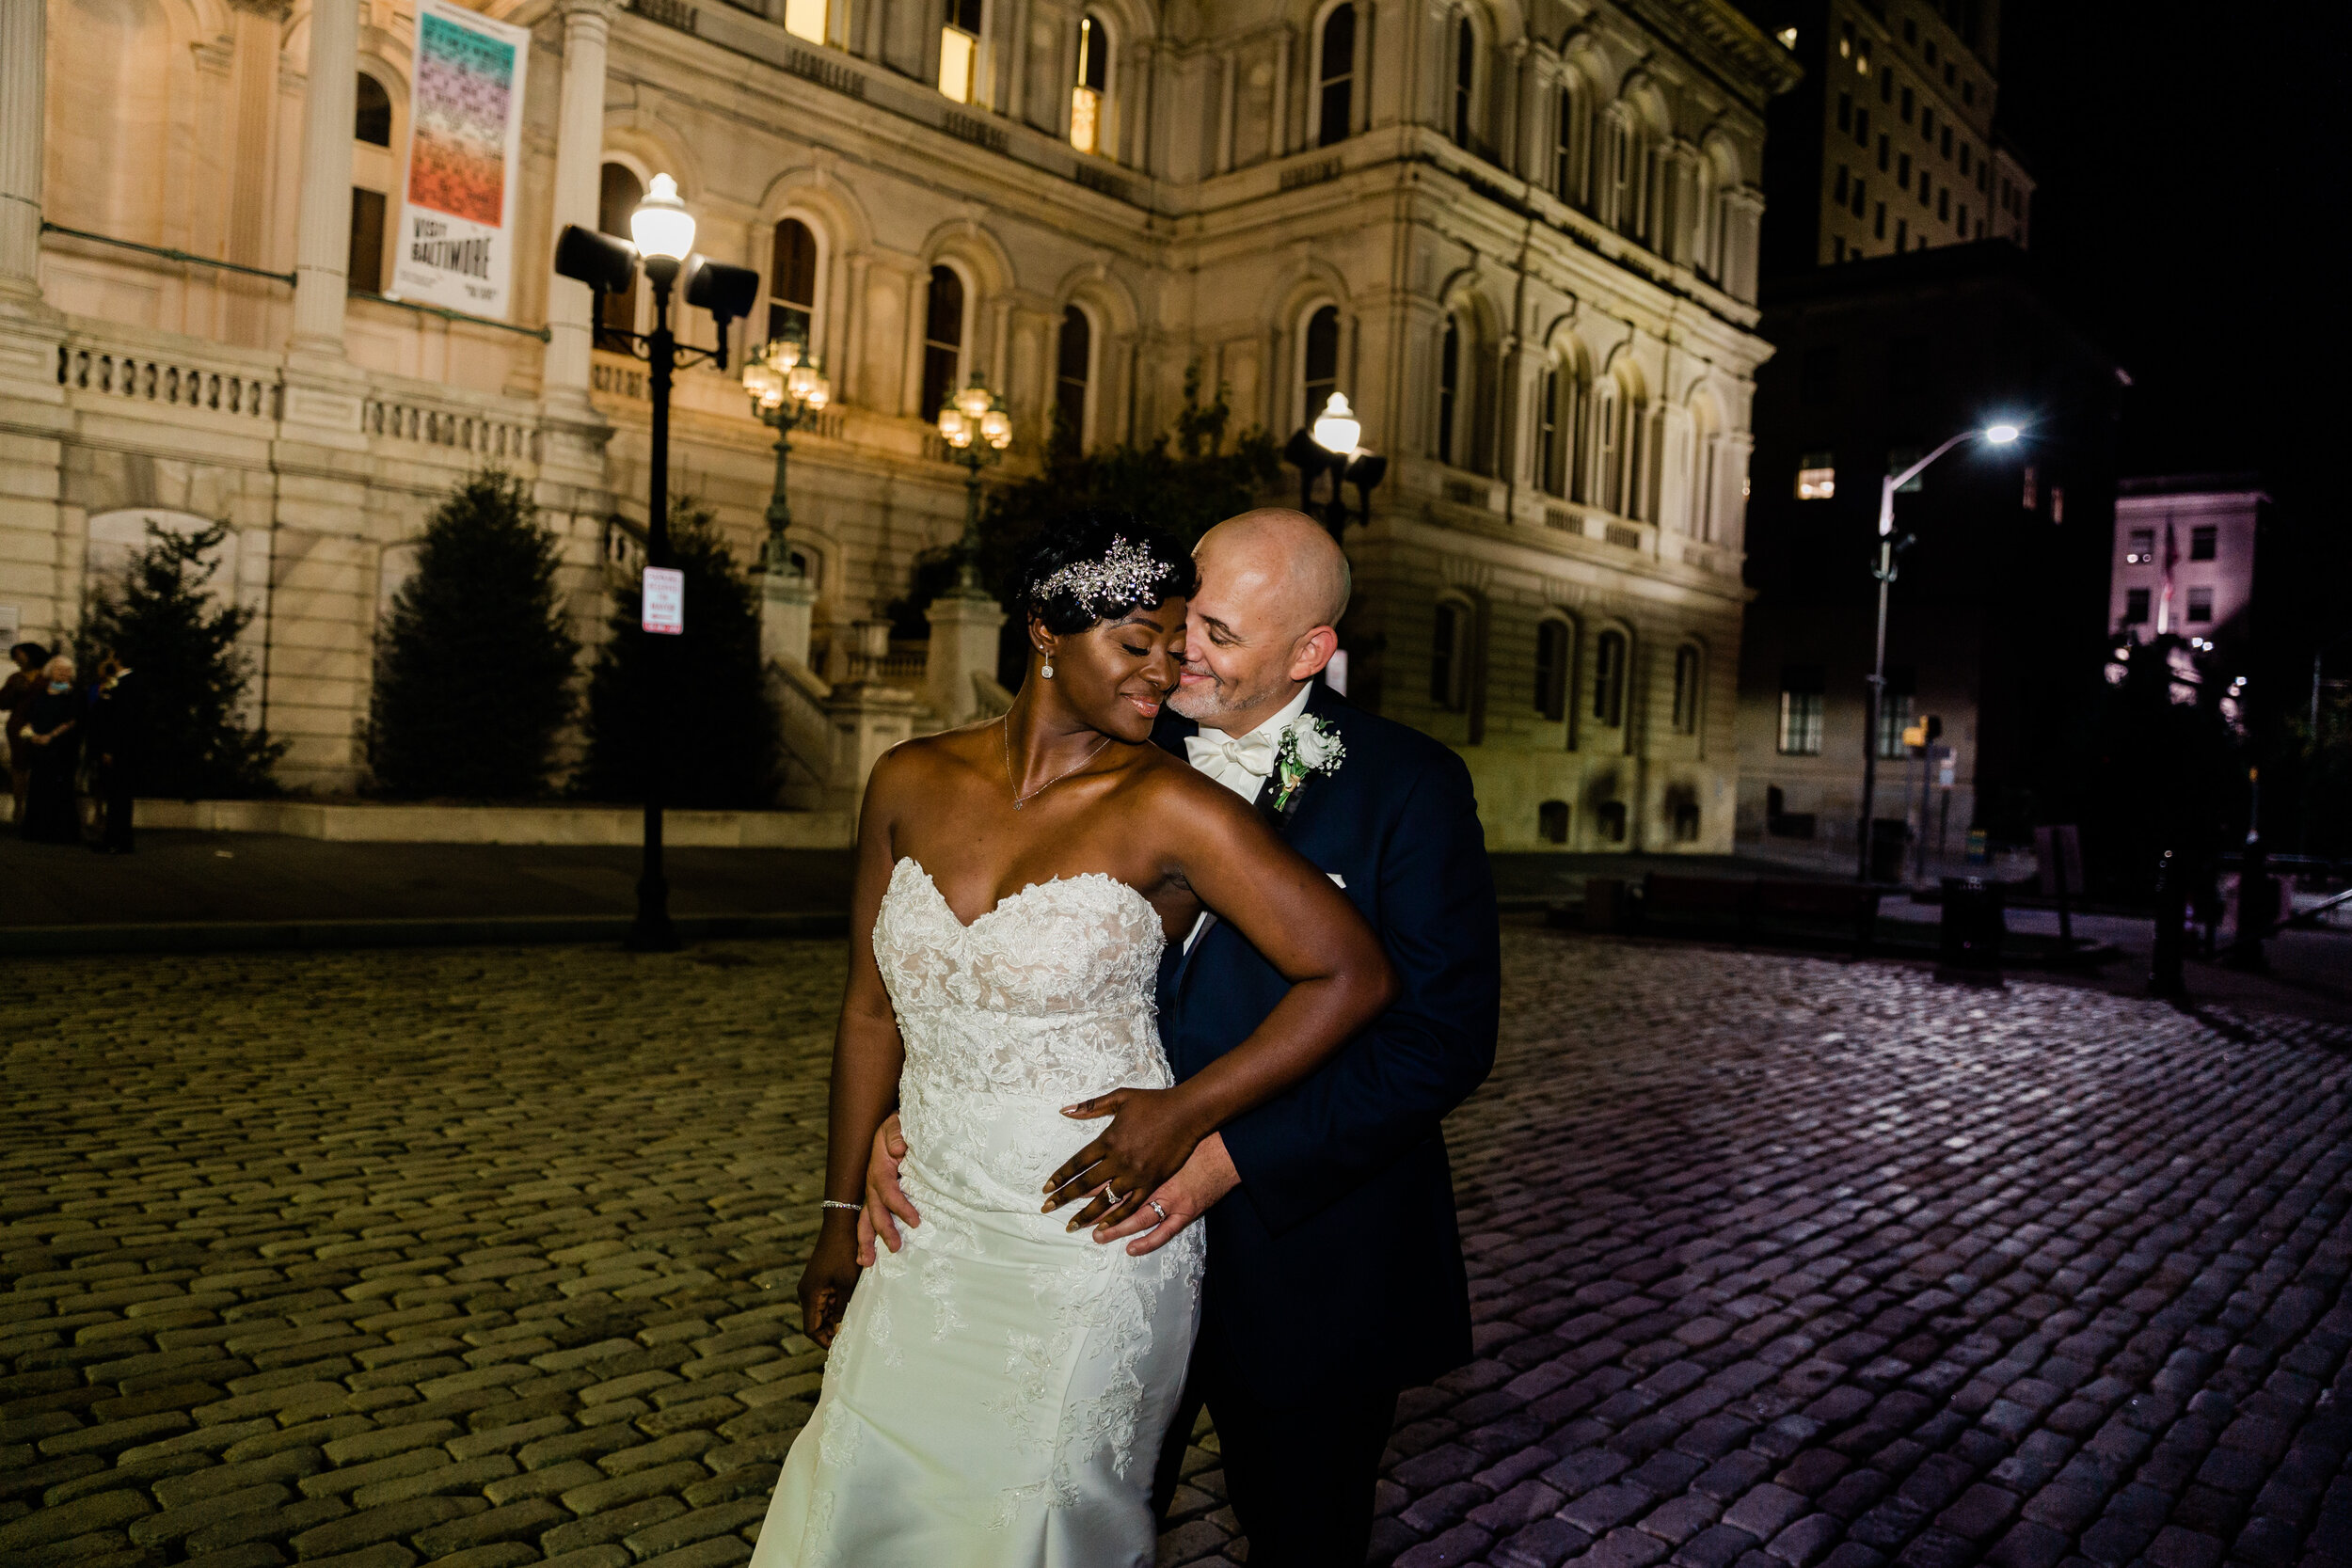 get married in baltimore city hall shot by megapixels media biracial couple wedding photographers maryland-98.jpg